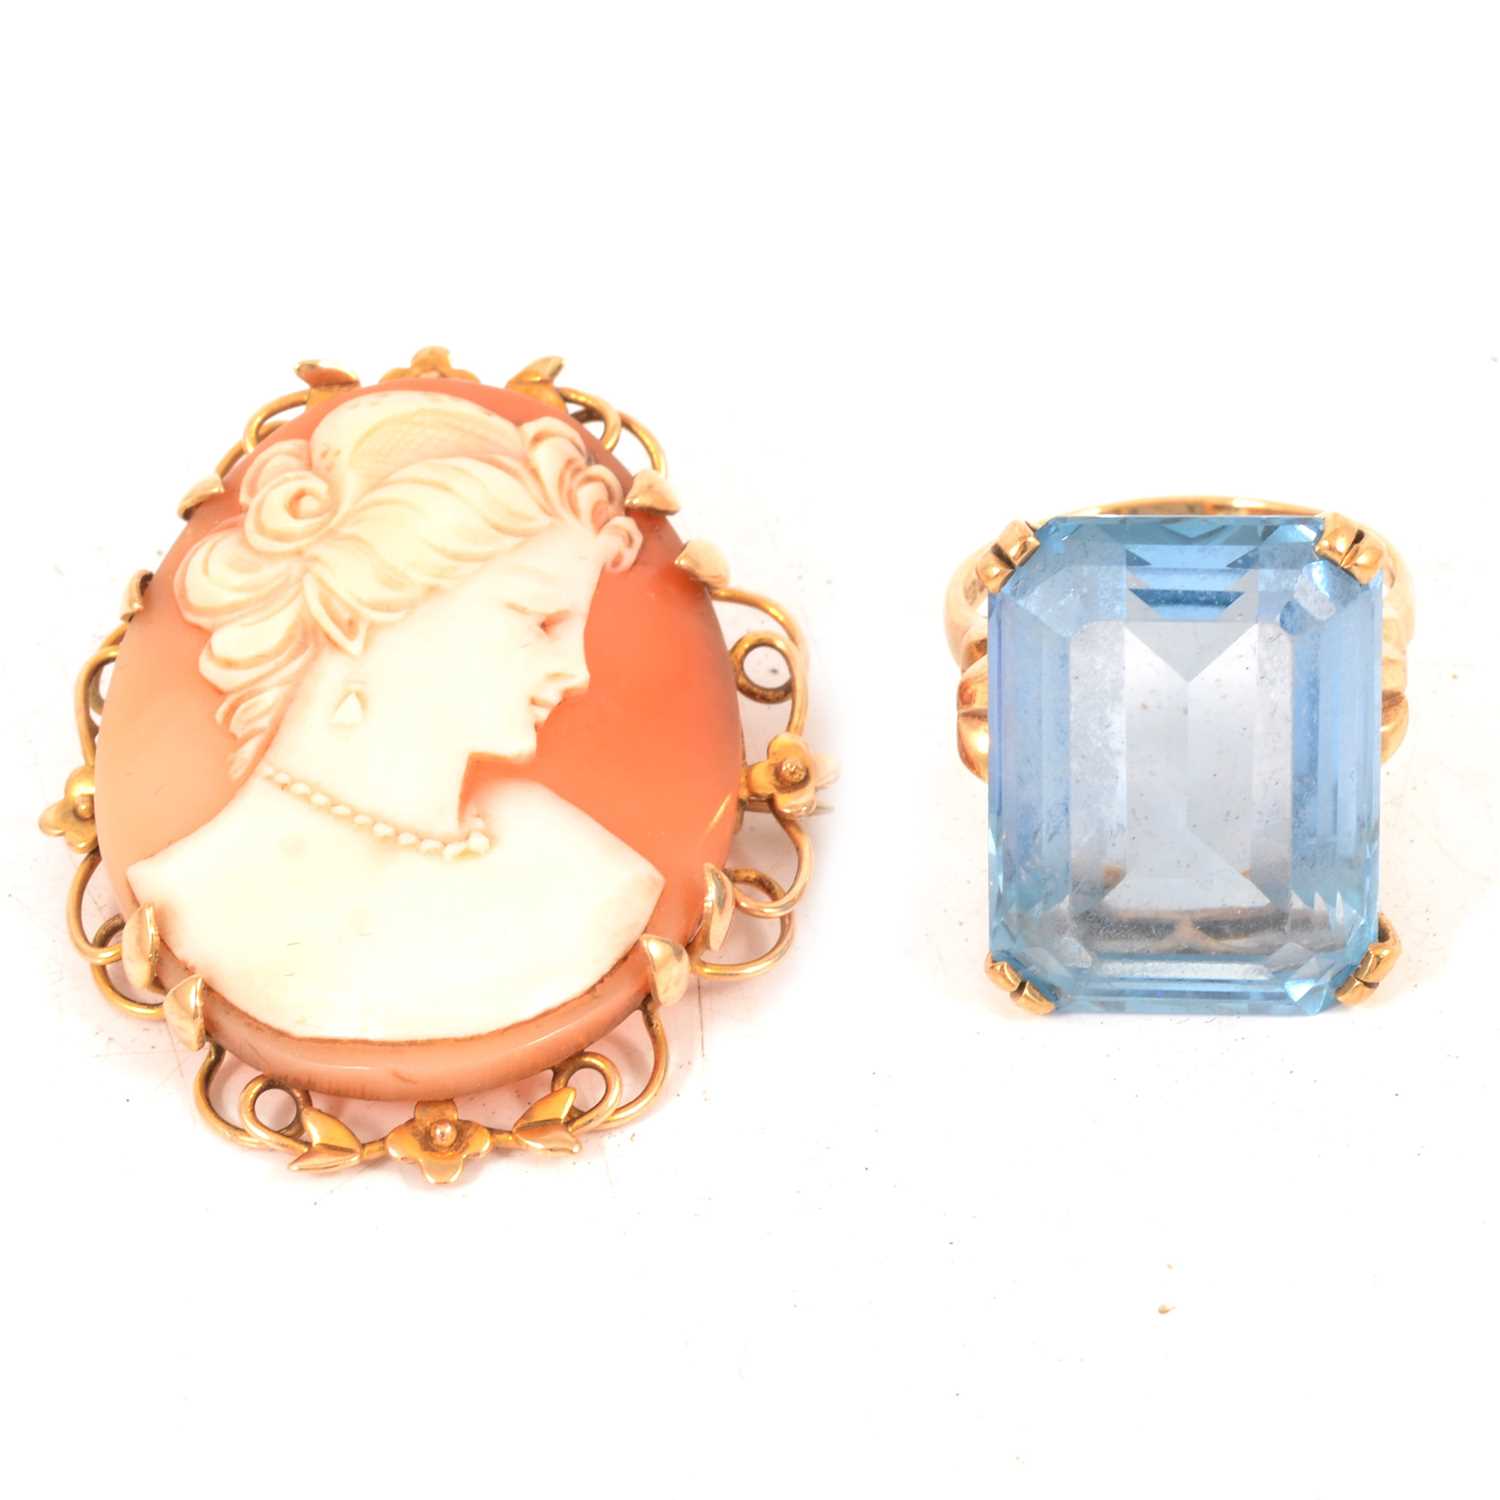 A synthetic blue spinel ring and a shell cameo brooch.